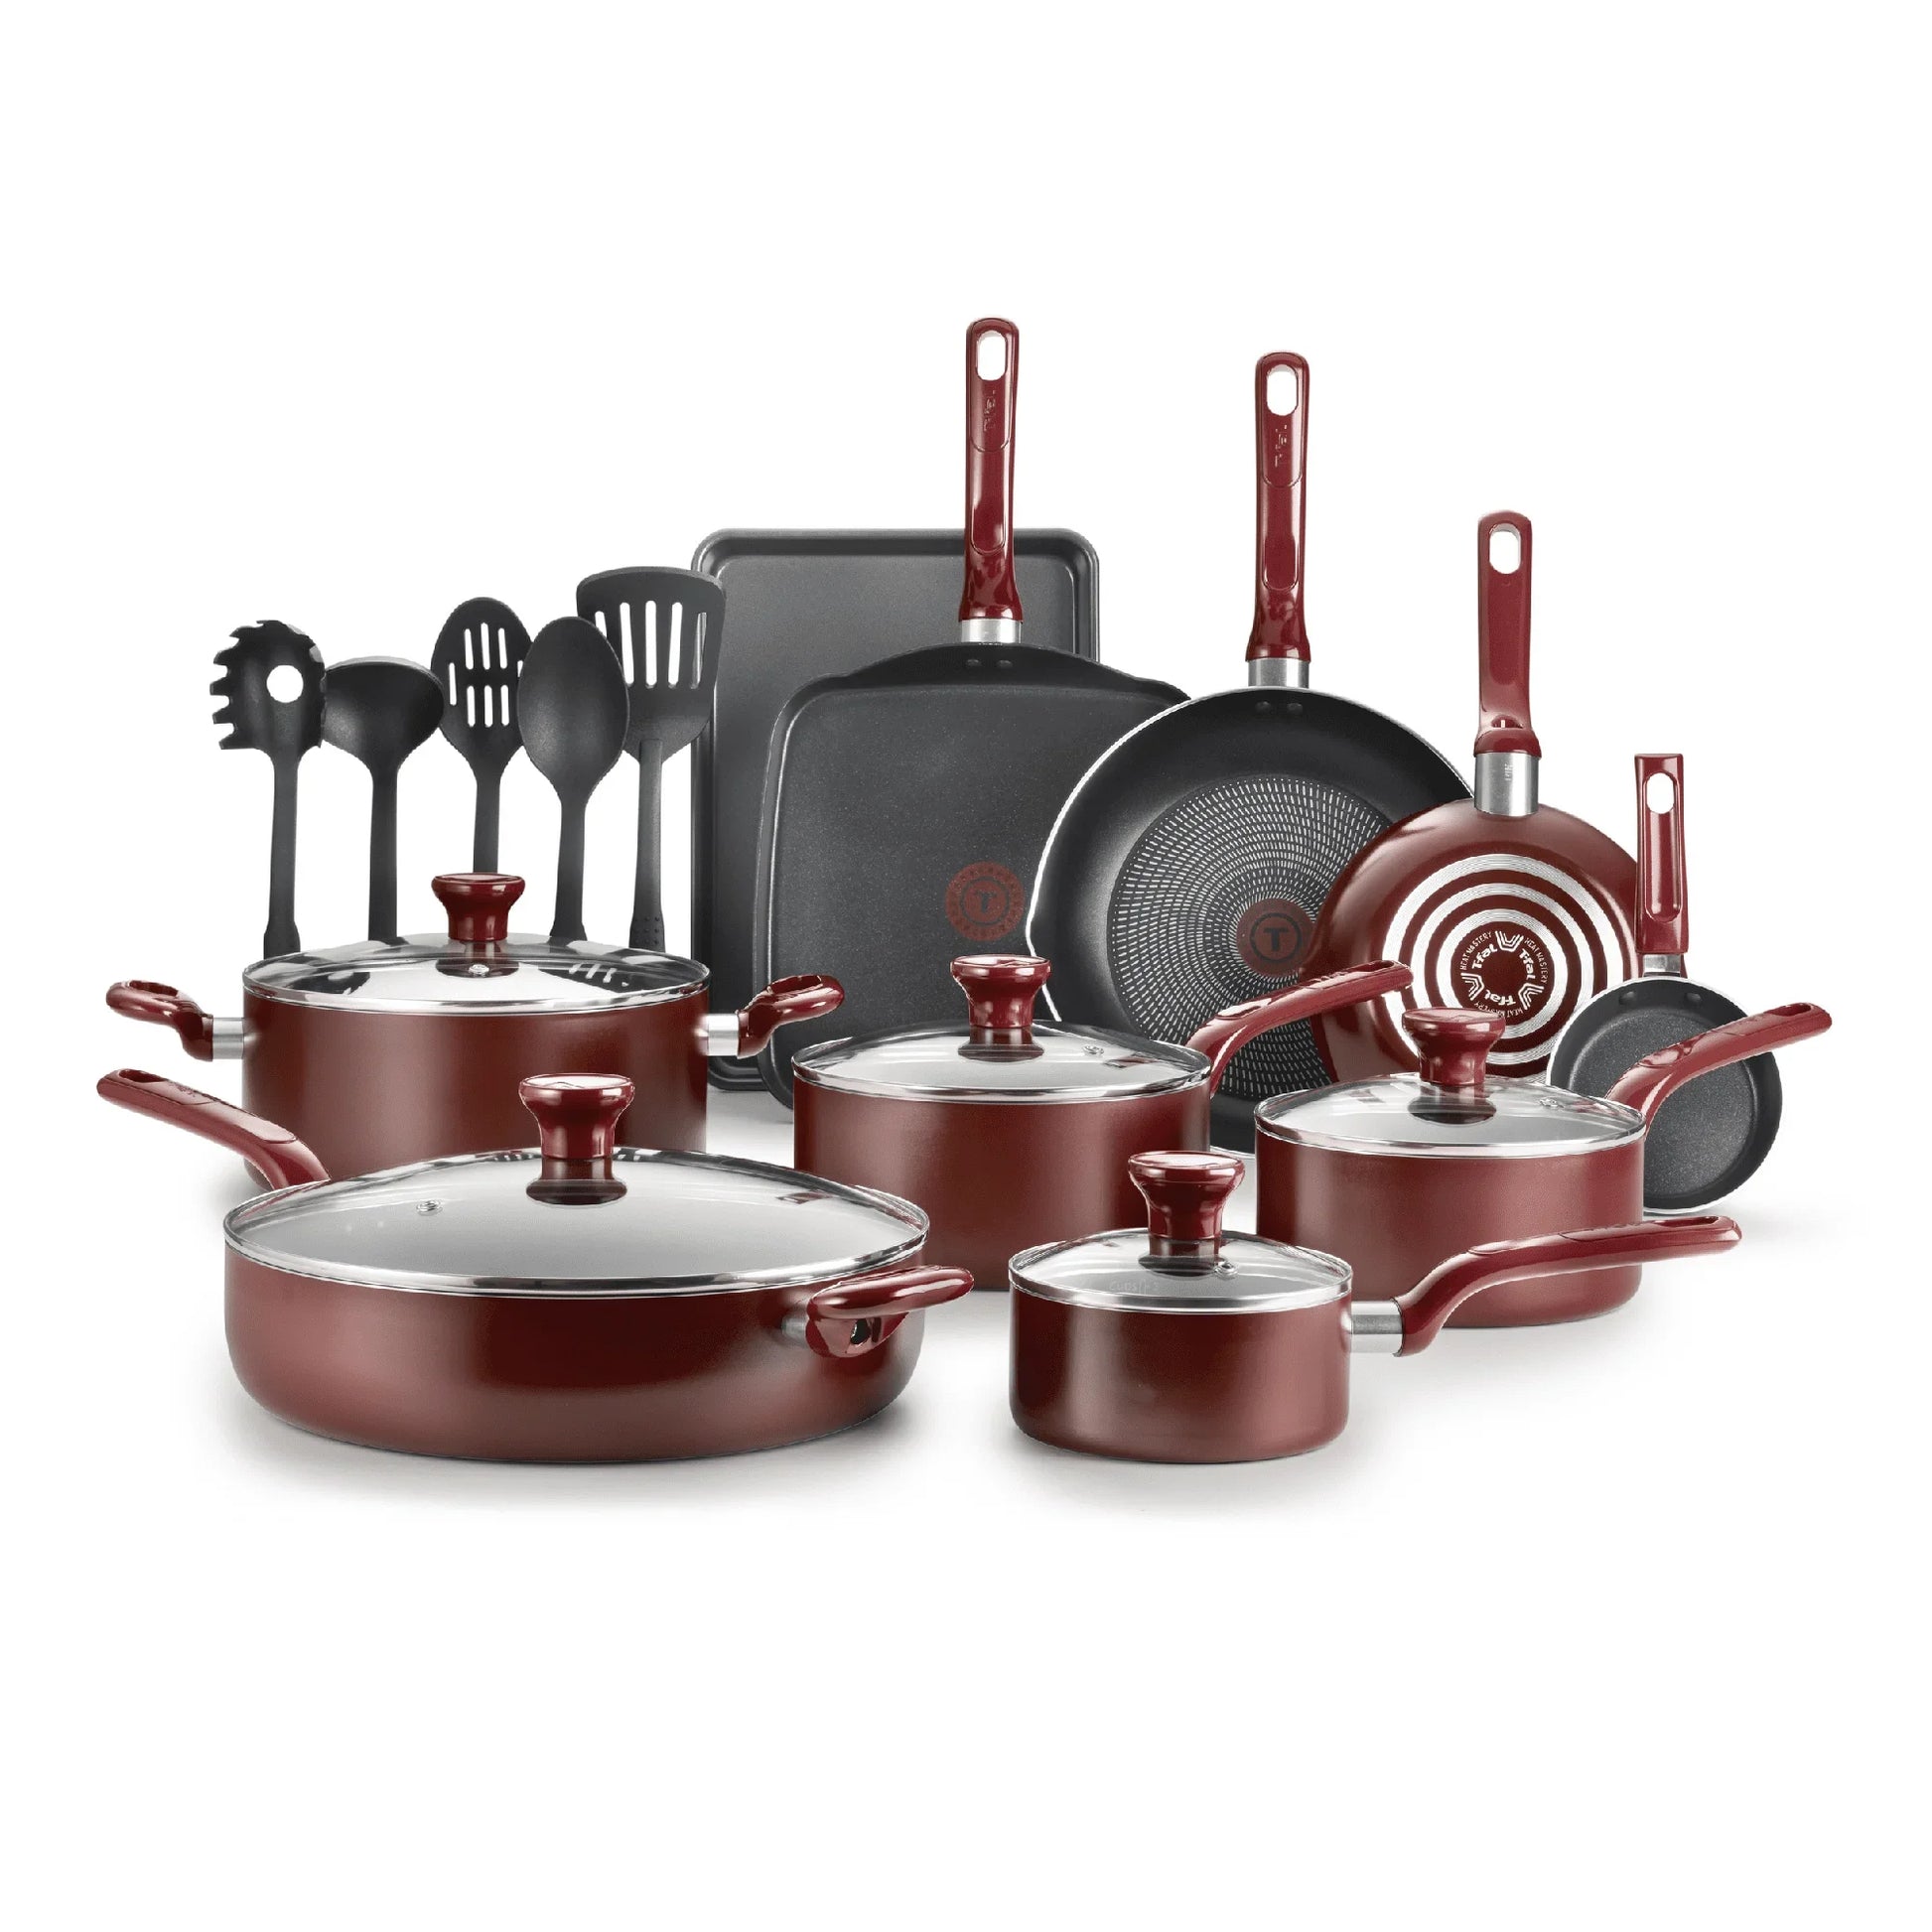 Easy Care Nonstick 20 Piece cookware set, dishwasher safe. - My Store